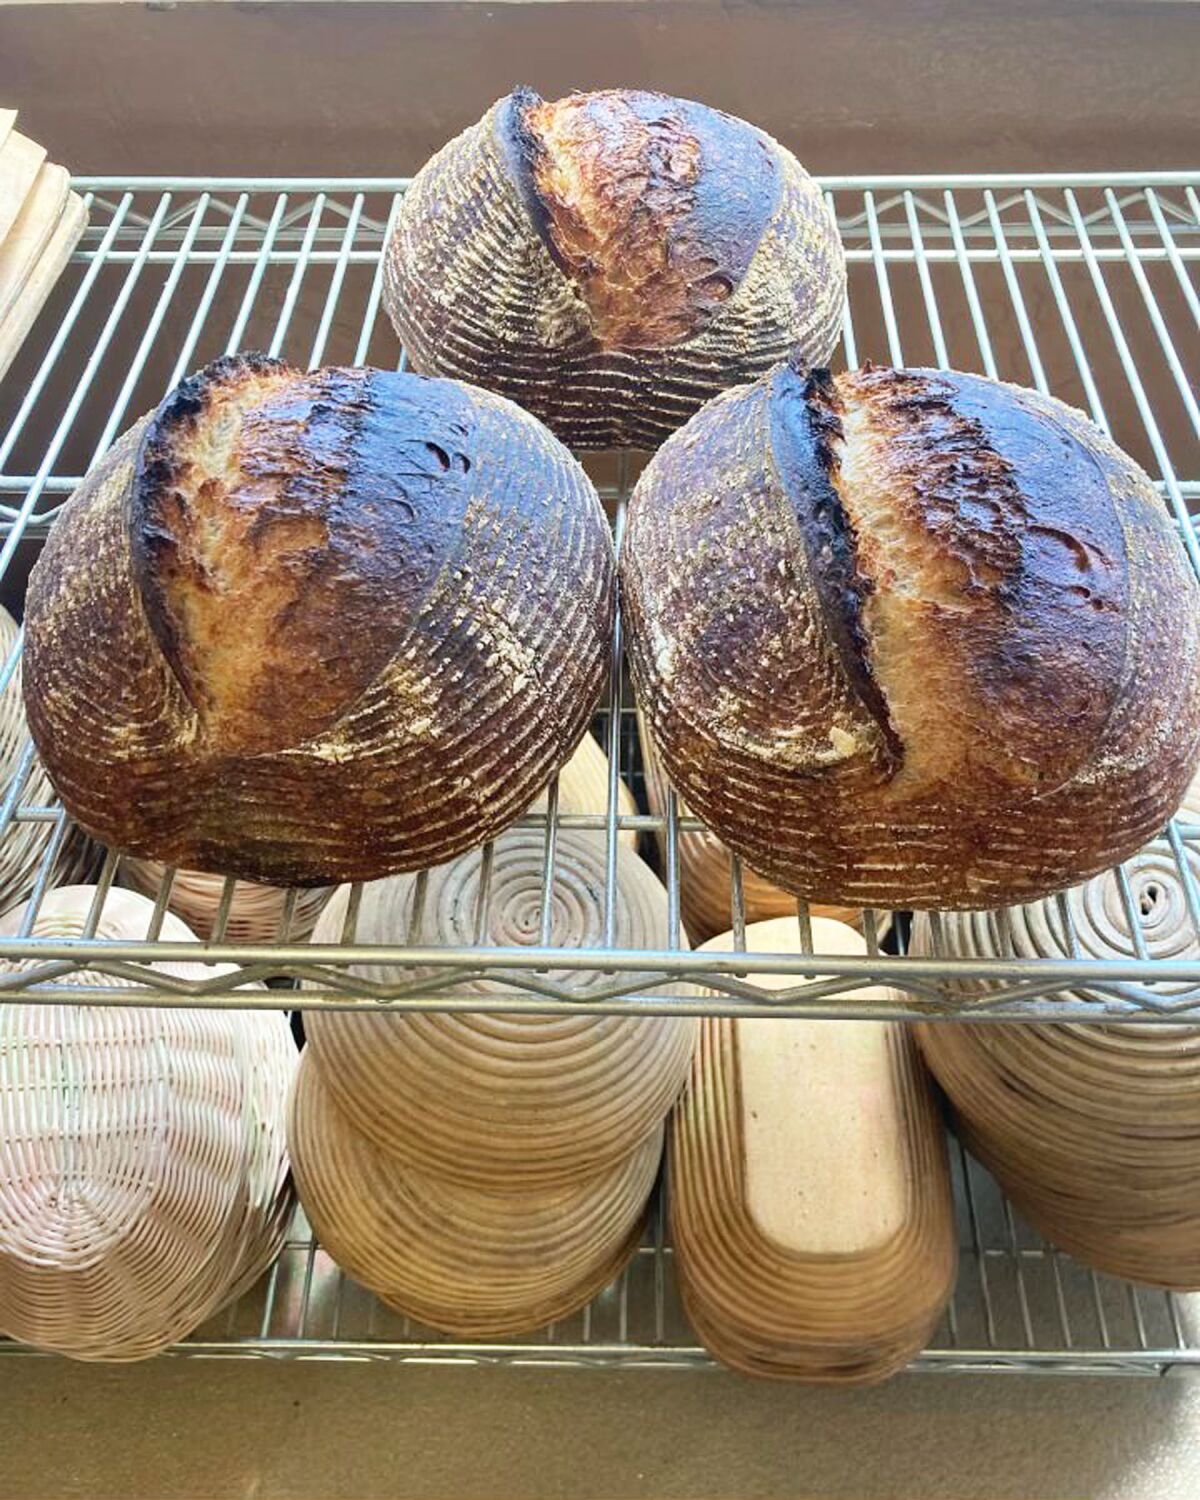 Bread loves come in many varieties at Wildwood Flour.